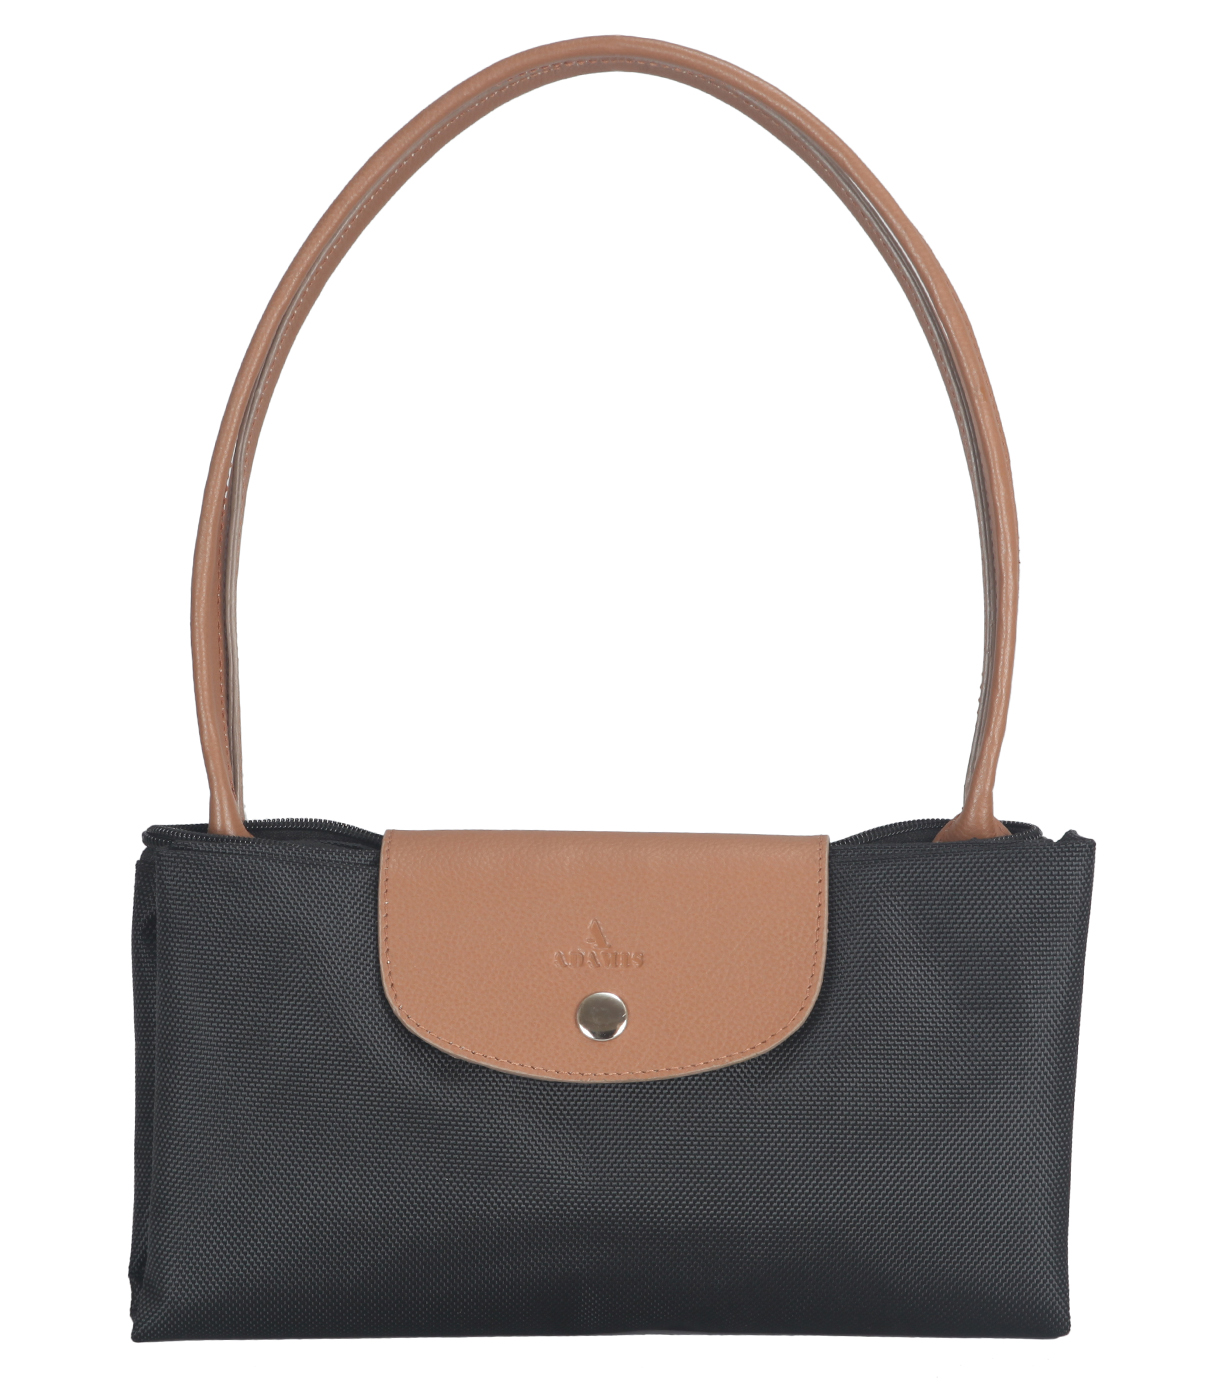 B767-Claude-Folding Tote in Tetron Material with Genuine Leather trimmings - Black